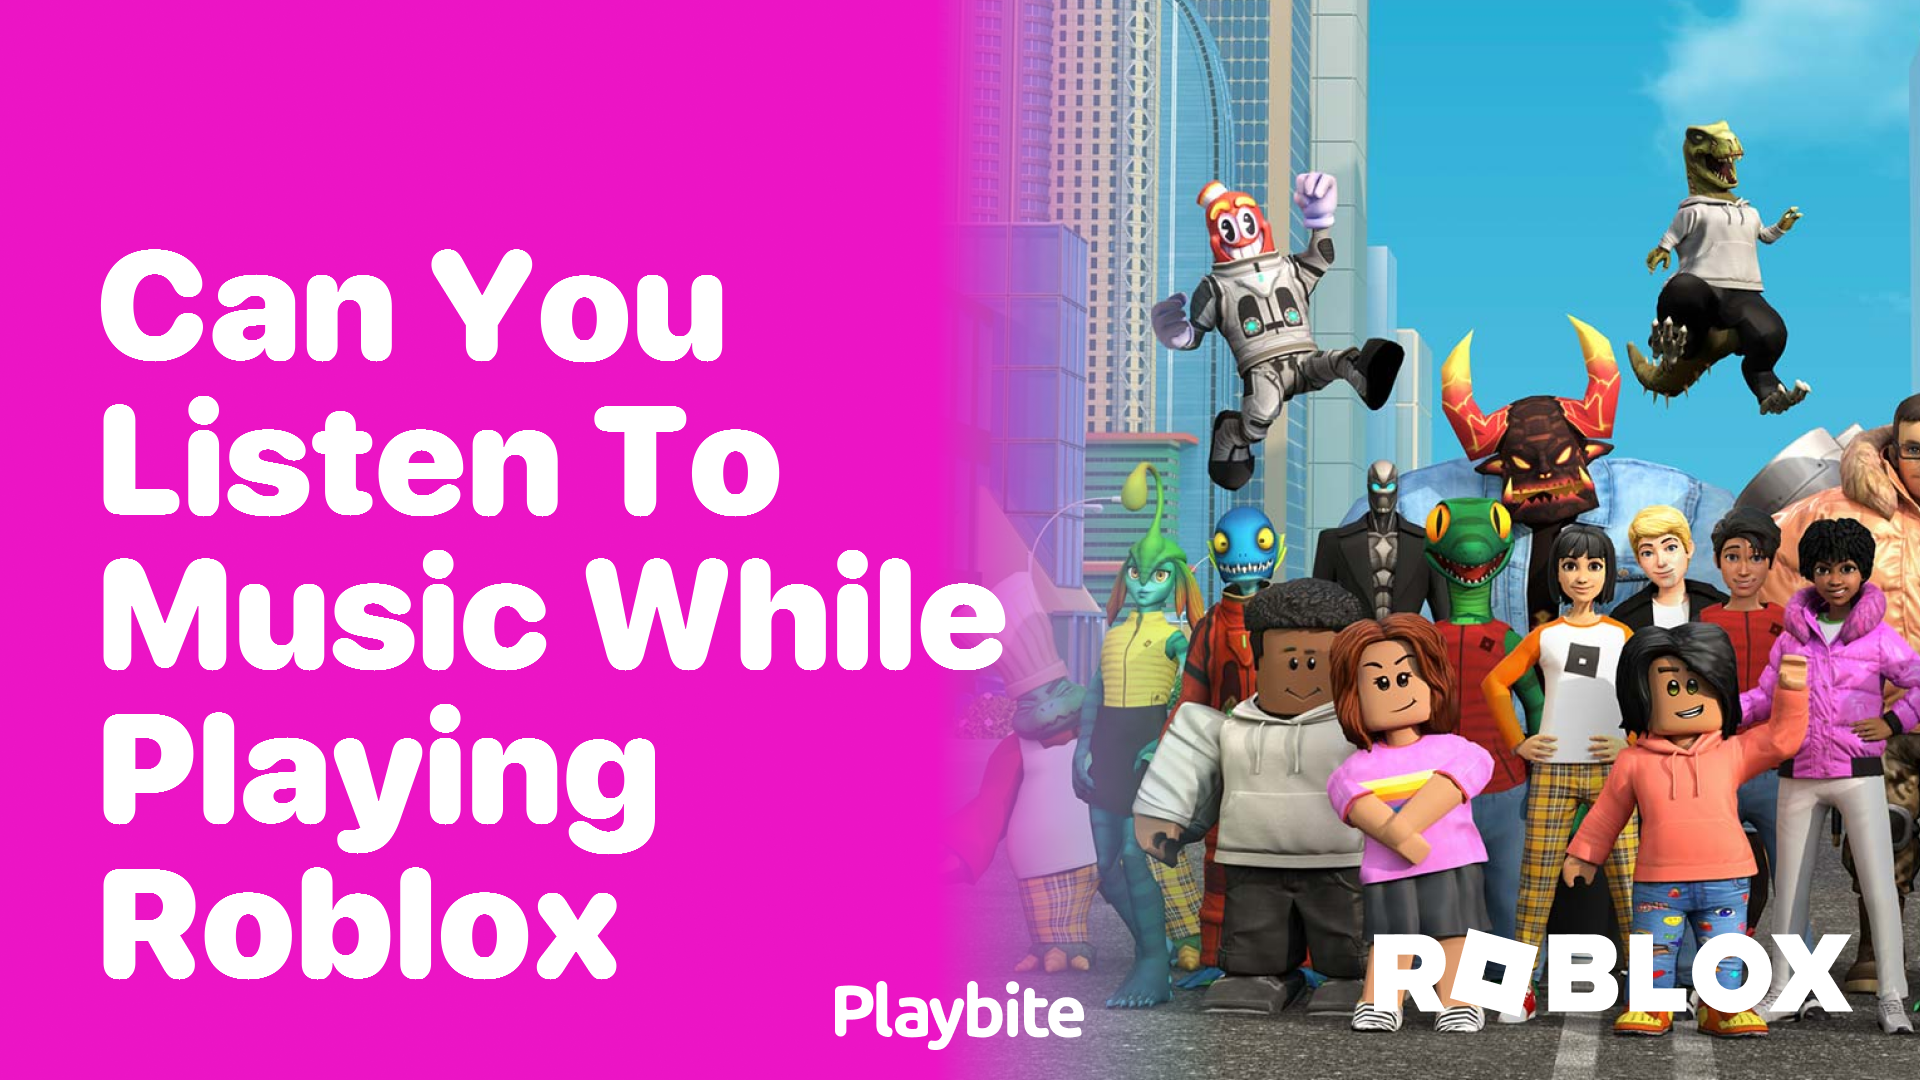 Can You Listen to Music While Playing Roblox?